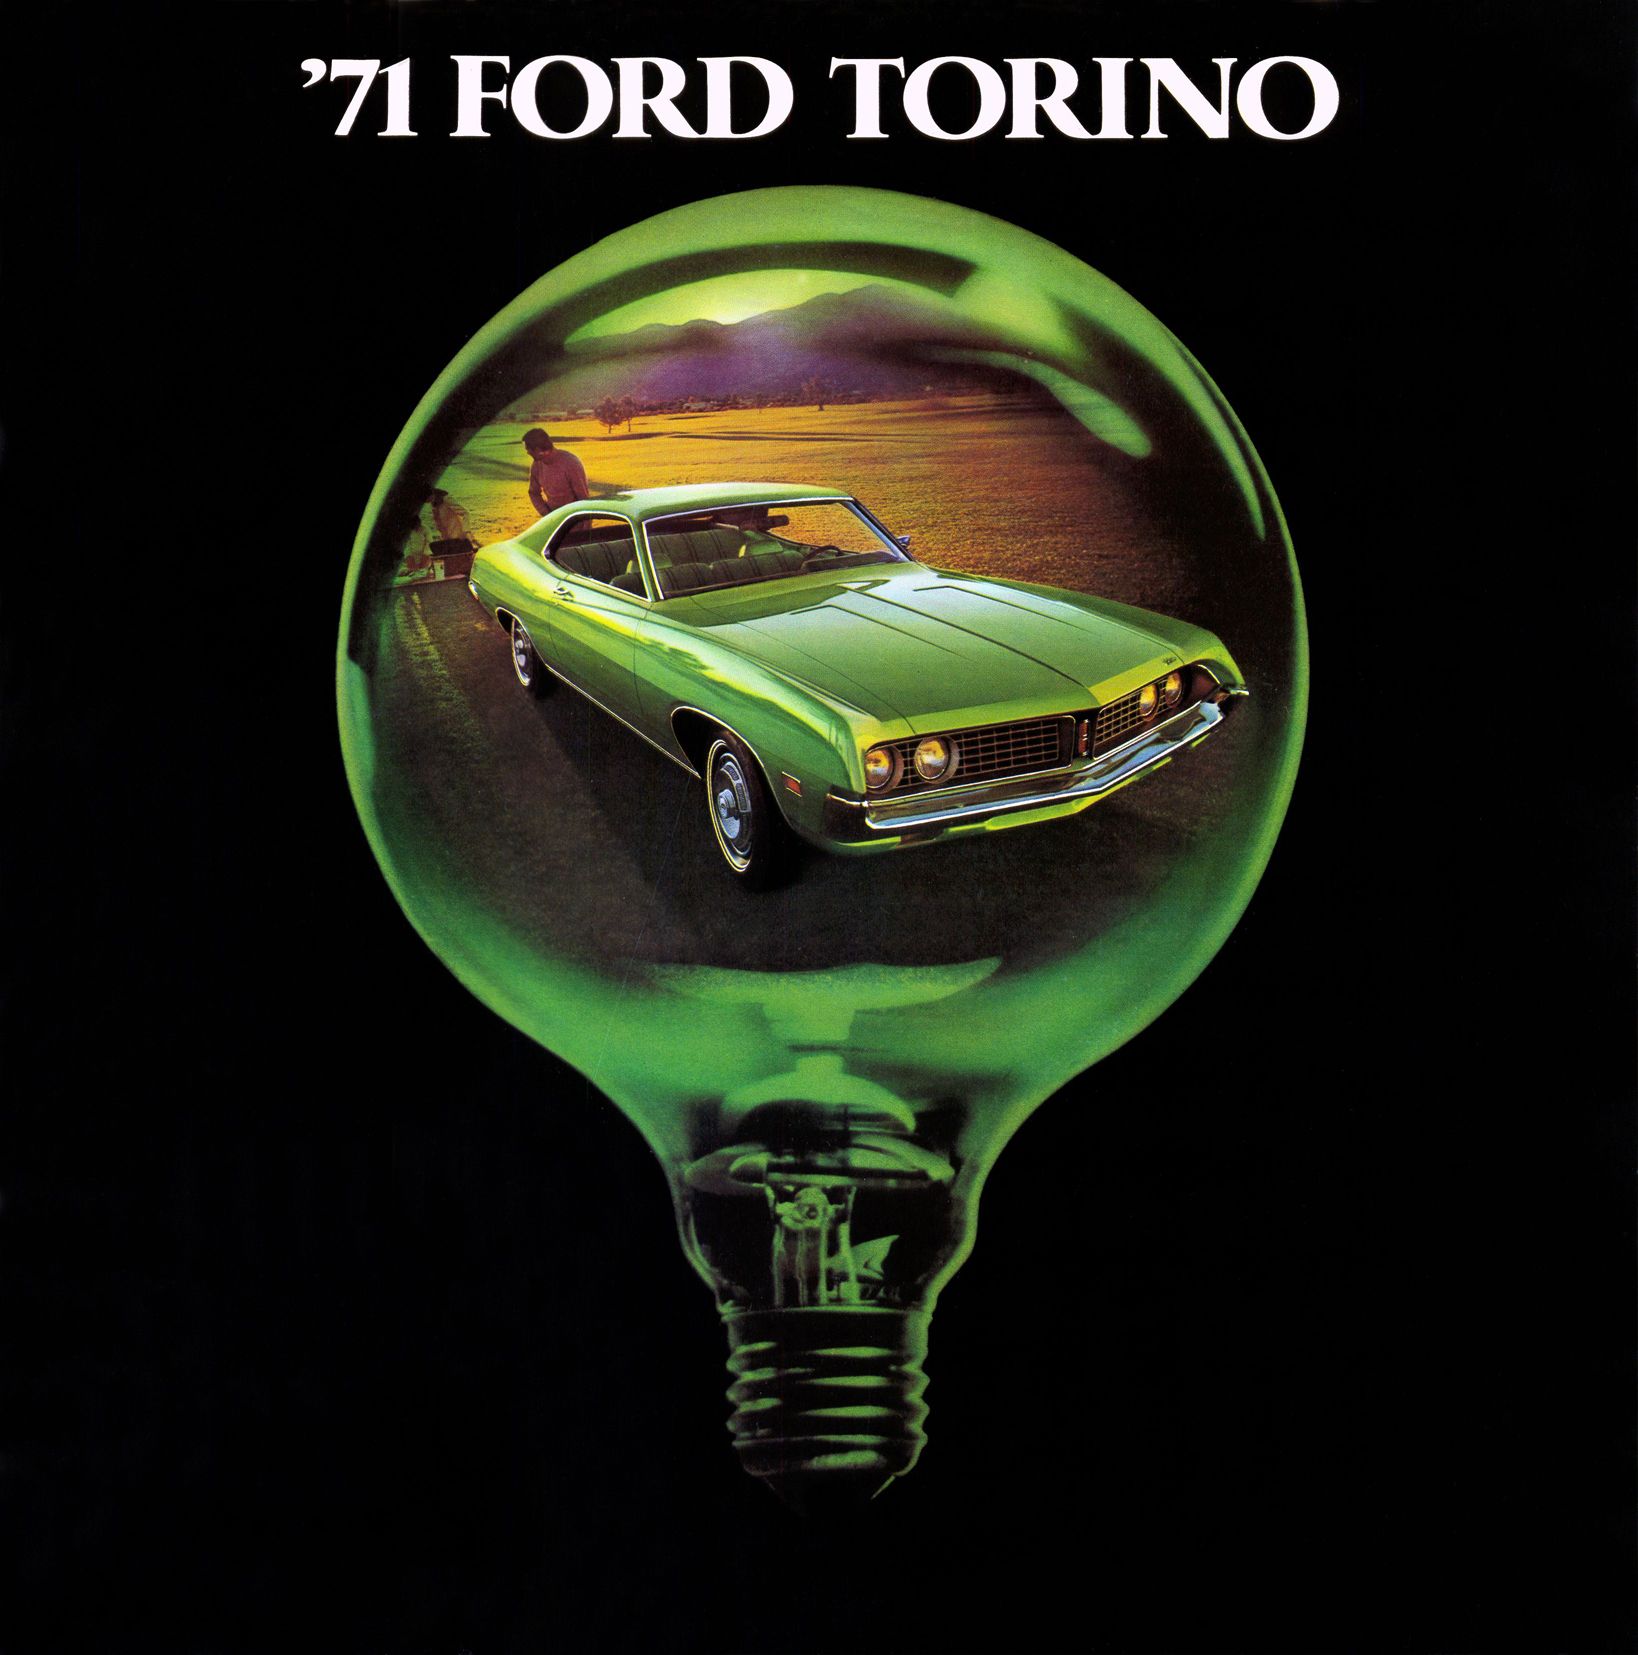 1971 Ford Torino Brochure Page 5